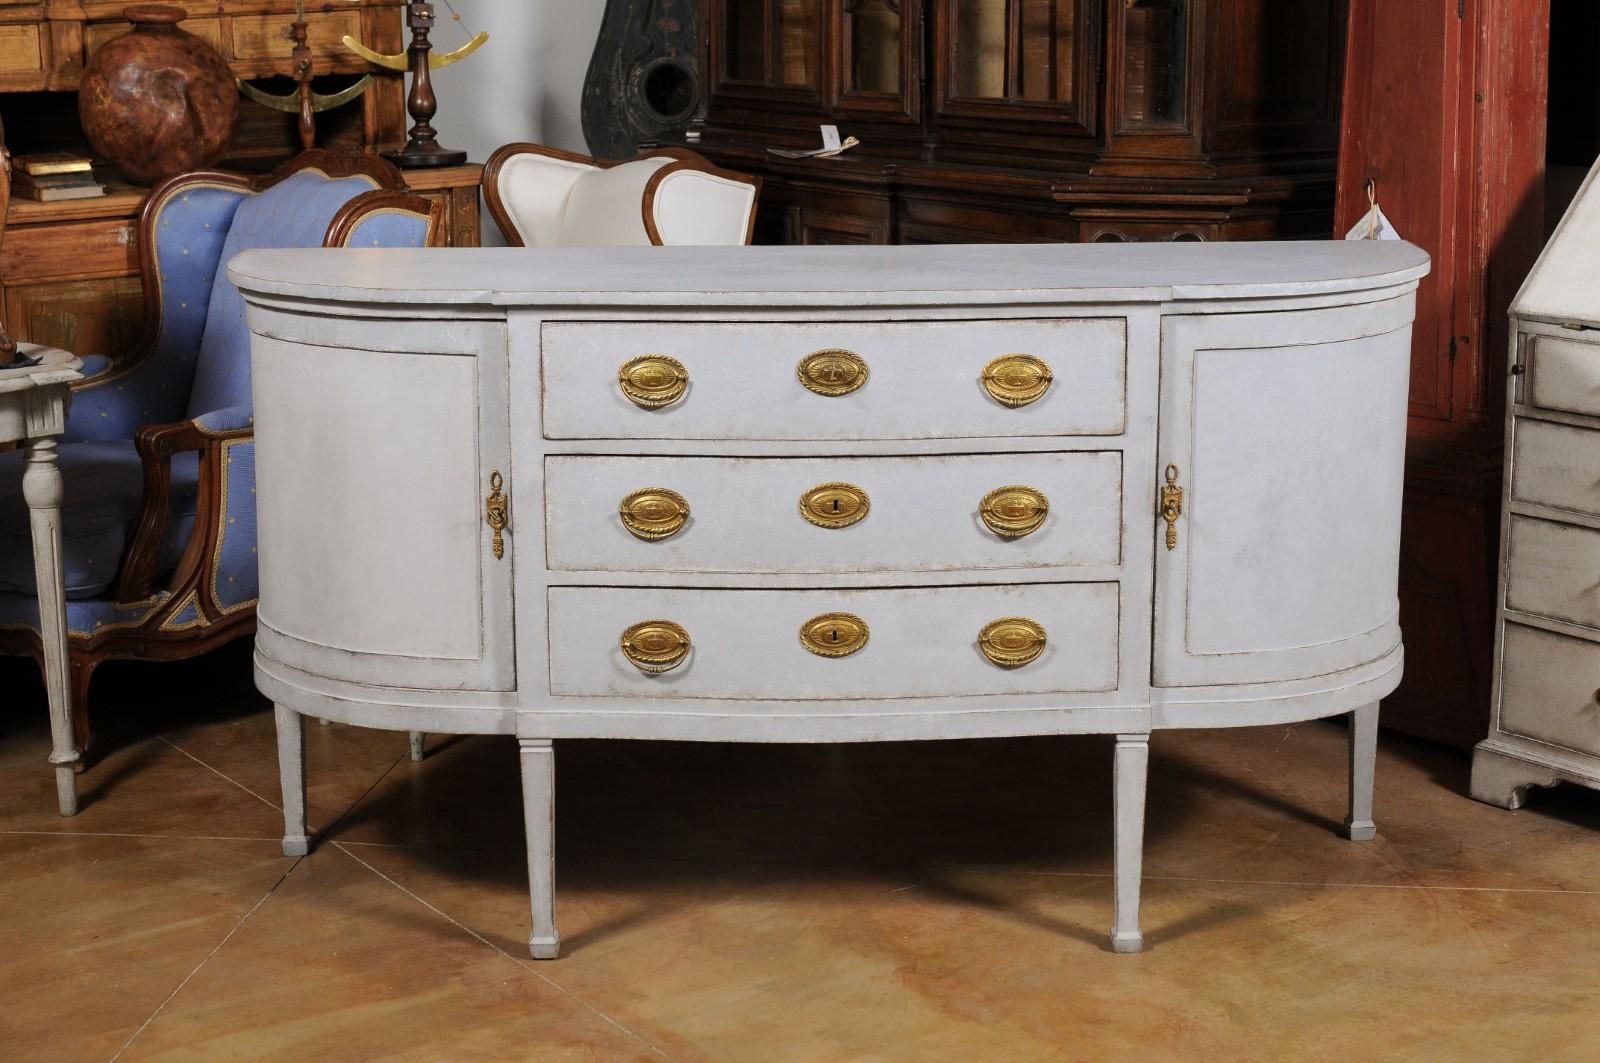 European 1830s Painted Demilune Sideboard with Three Drawers and Rounded Doors For Sale 5